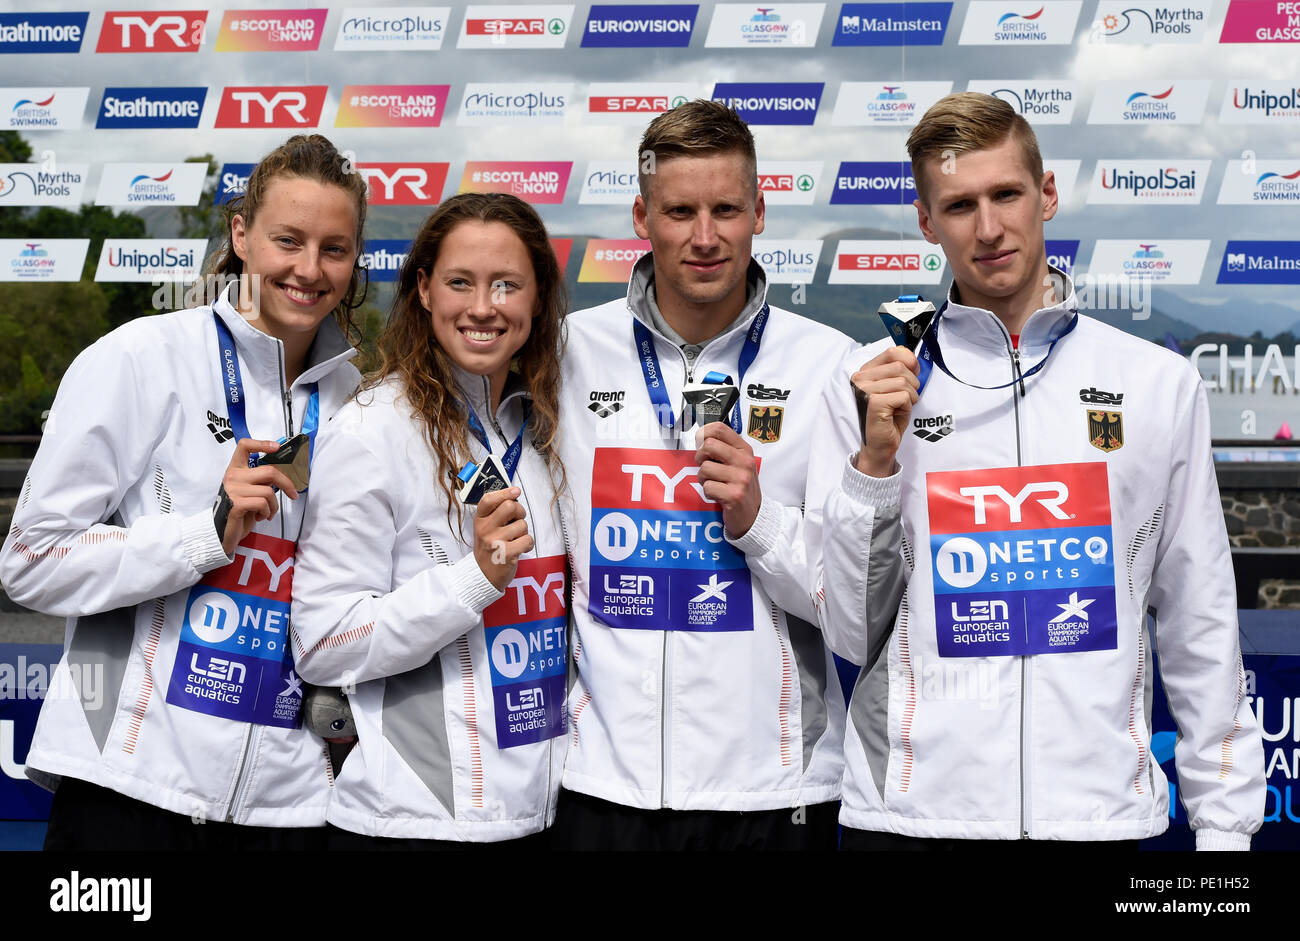 The German team celebrate winning Silver in the Open Water Swimming Mixed Relay during day ten of the 2018 European Championships at Loch Lomond, Stirling. PRESS ASSOCIATION Photo. Picture date: Saturday August 11, 2018. See PA story OPEN European. Photo credit should read: Ian Rutherford/PA Wire. Stock Photo